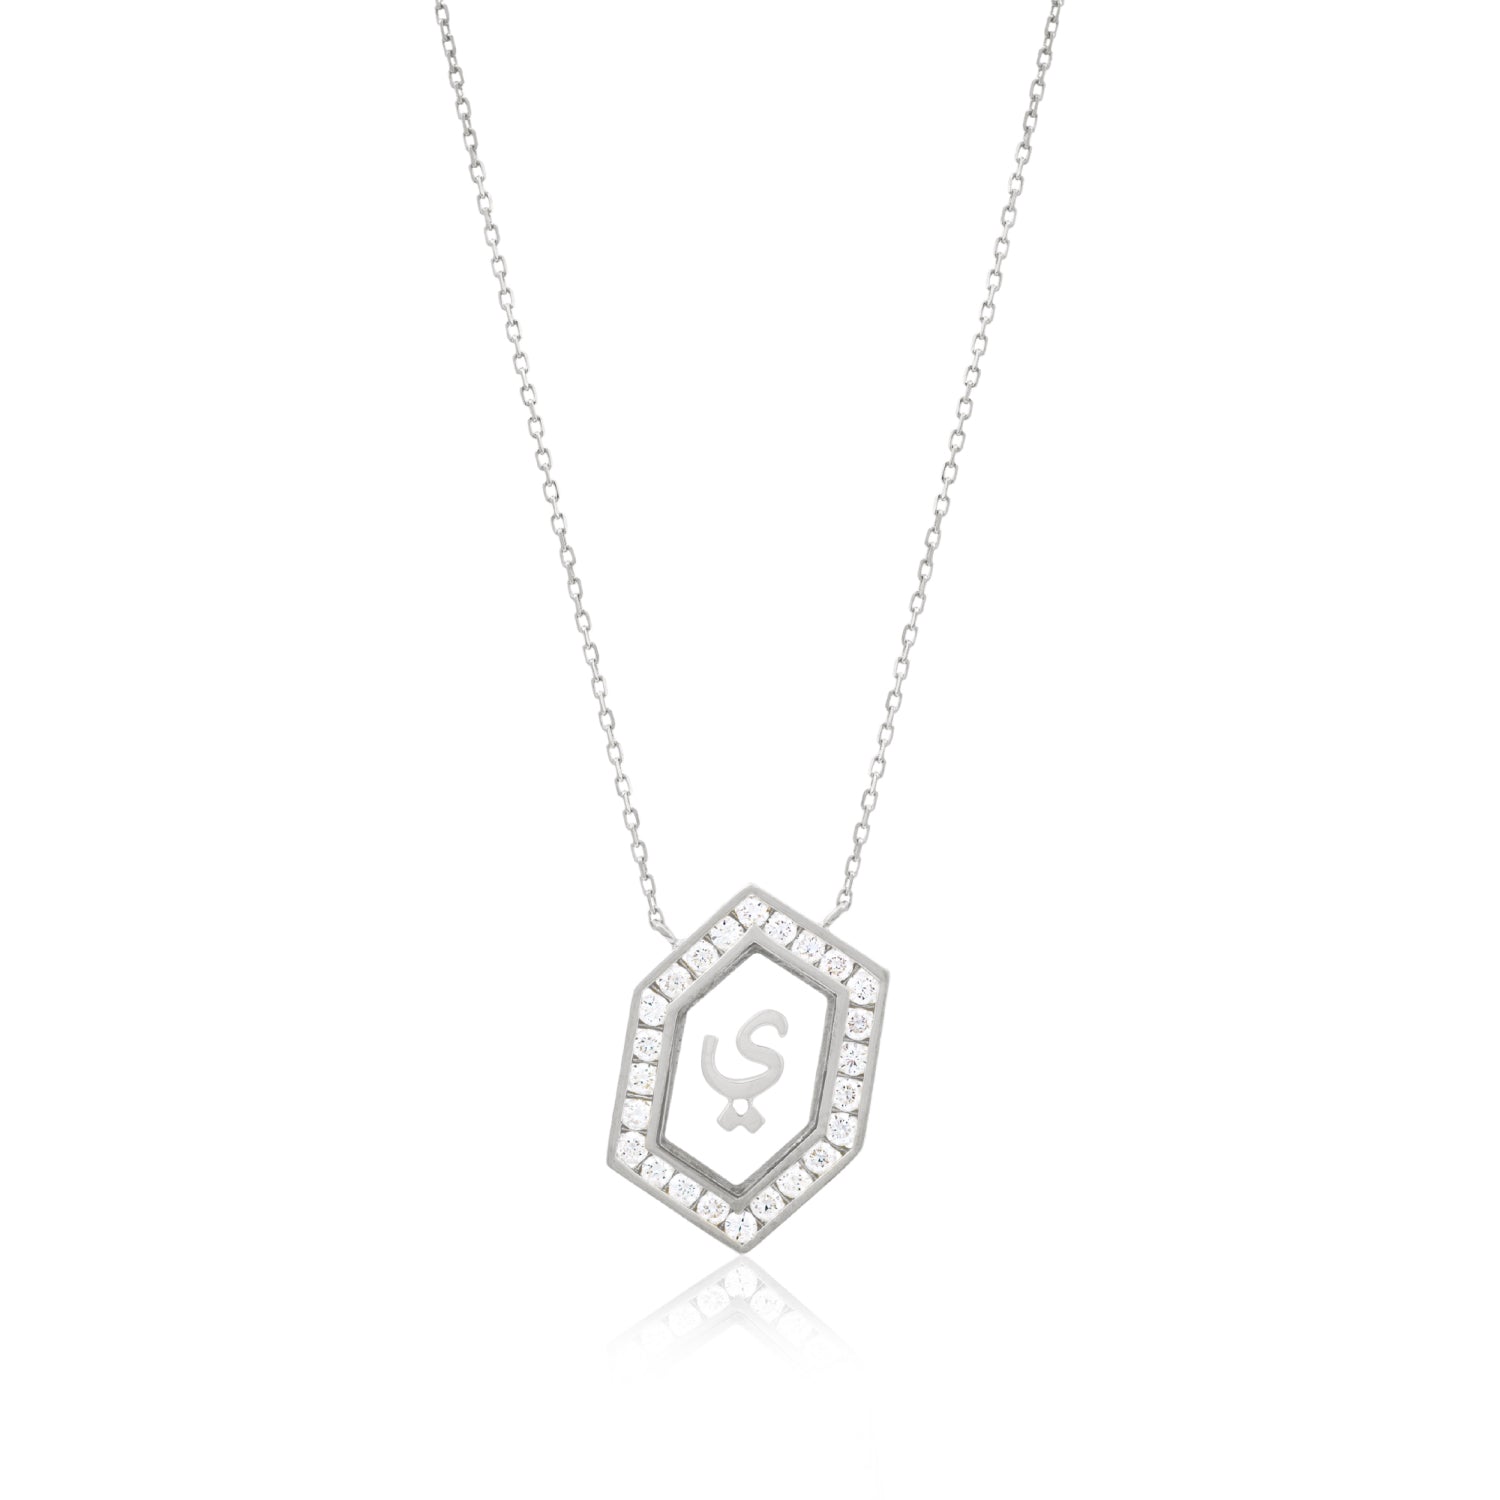 Qamoos 1.0 Letter ي Diamond Necklace in White Gold